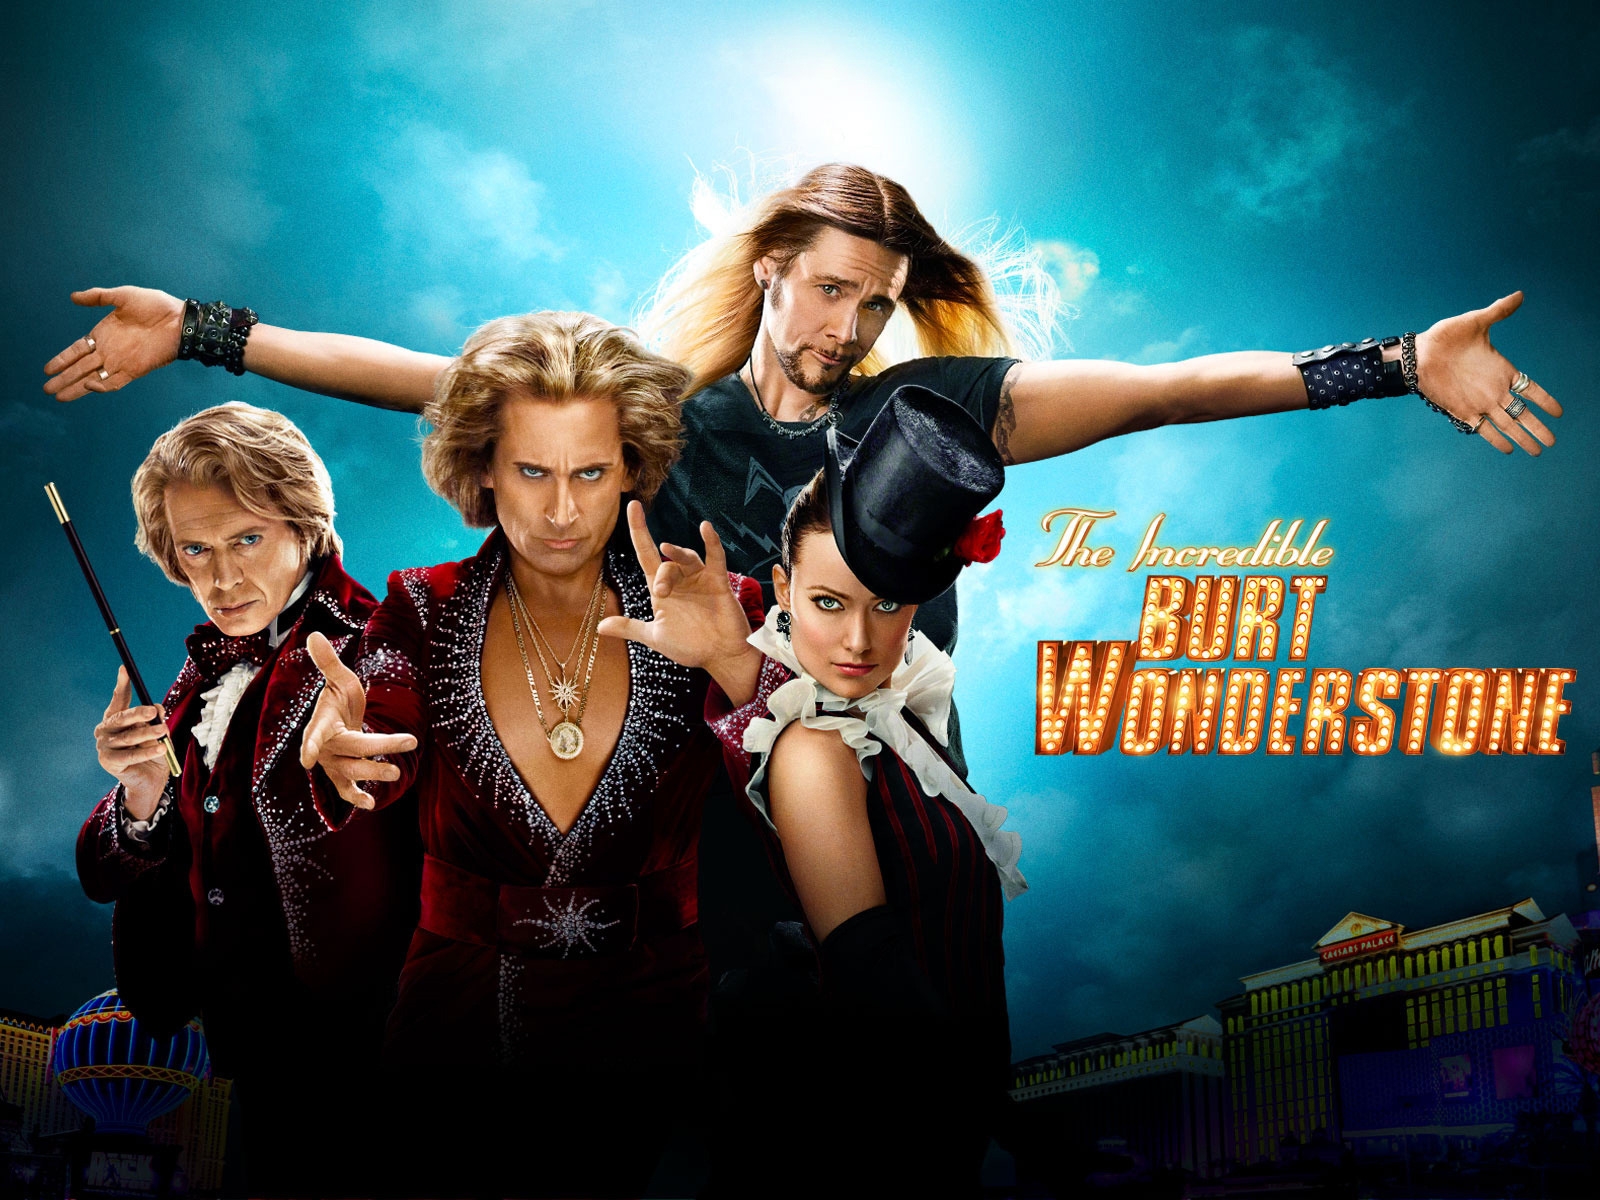 2013 The Incredible Burt Wonderstone Poster for 1600 x 1200 resolution